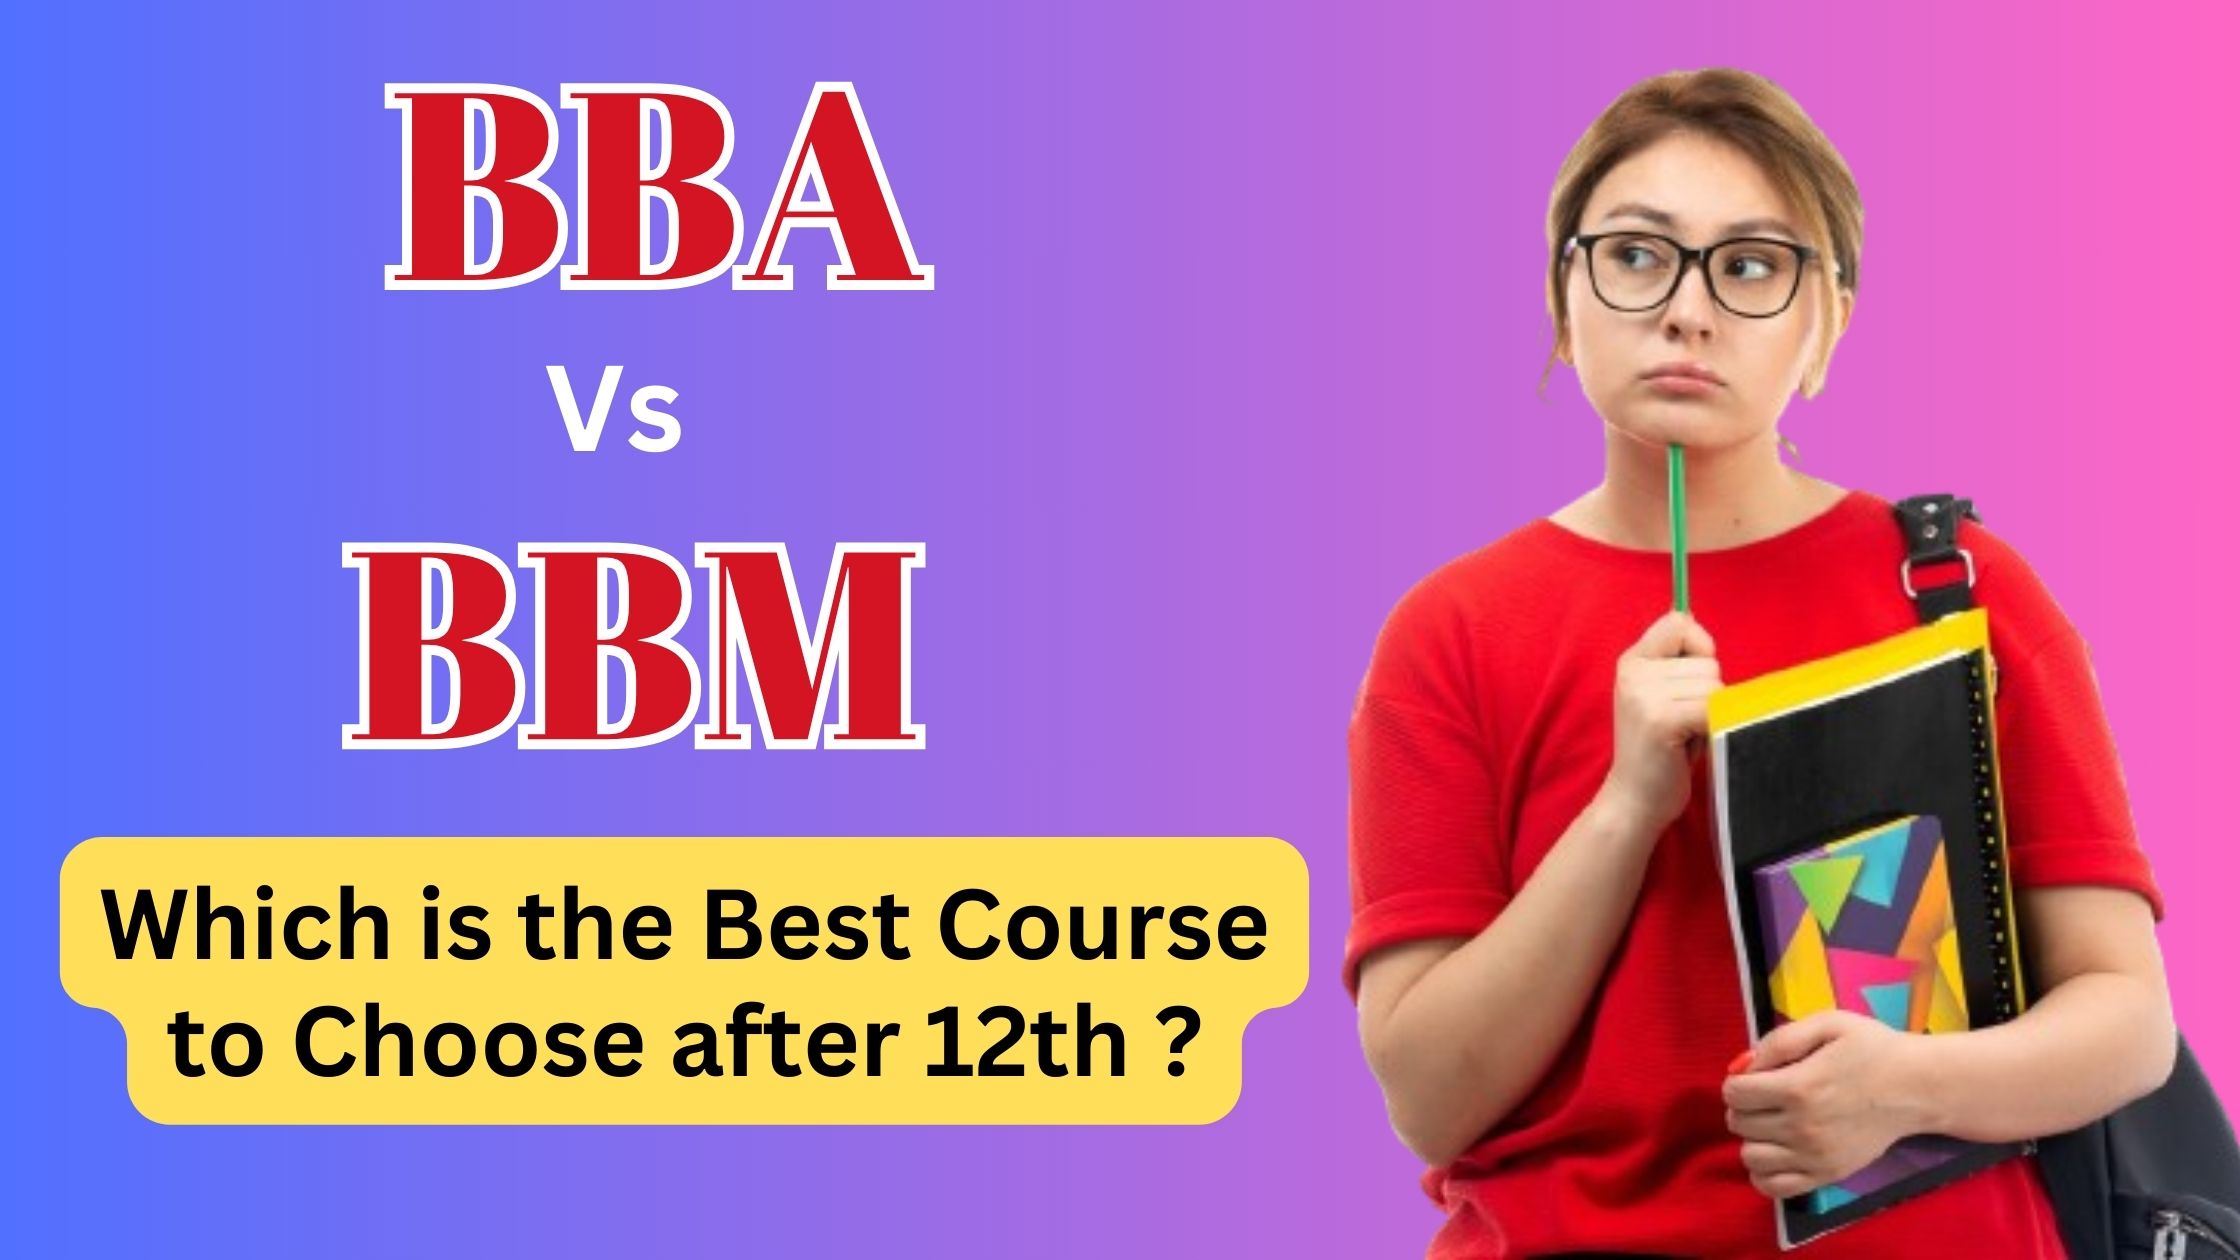 BBA Vs BBM: Which is the Best Course to Choose after 12th?